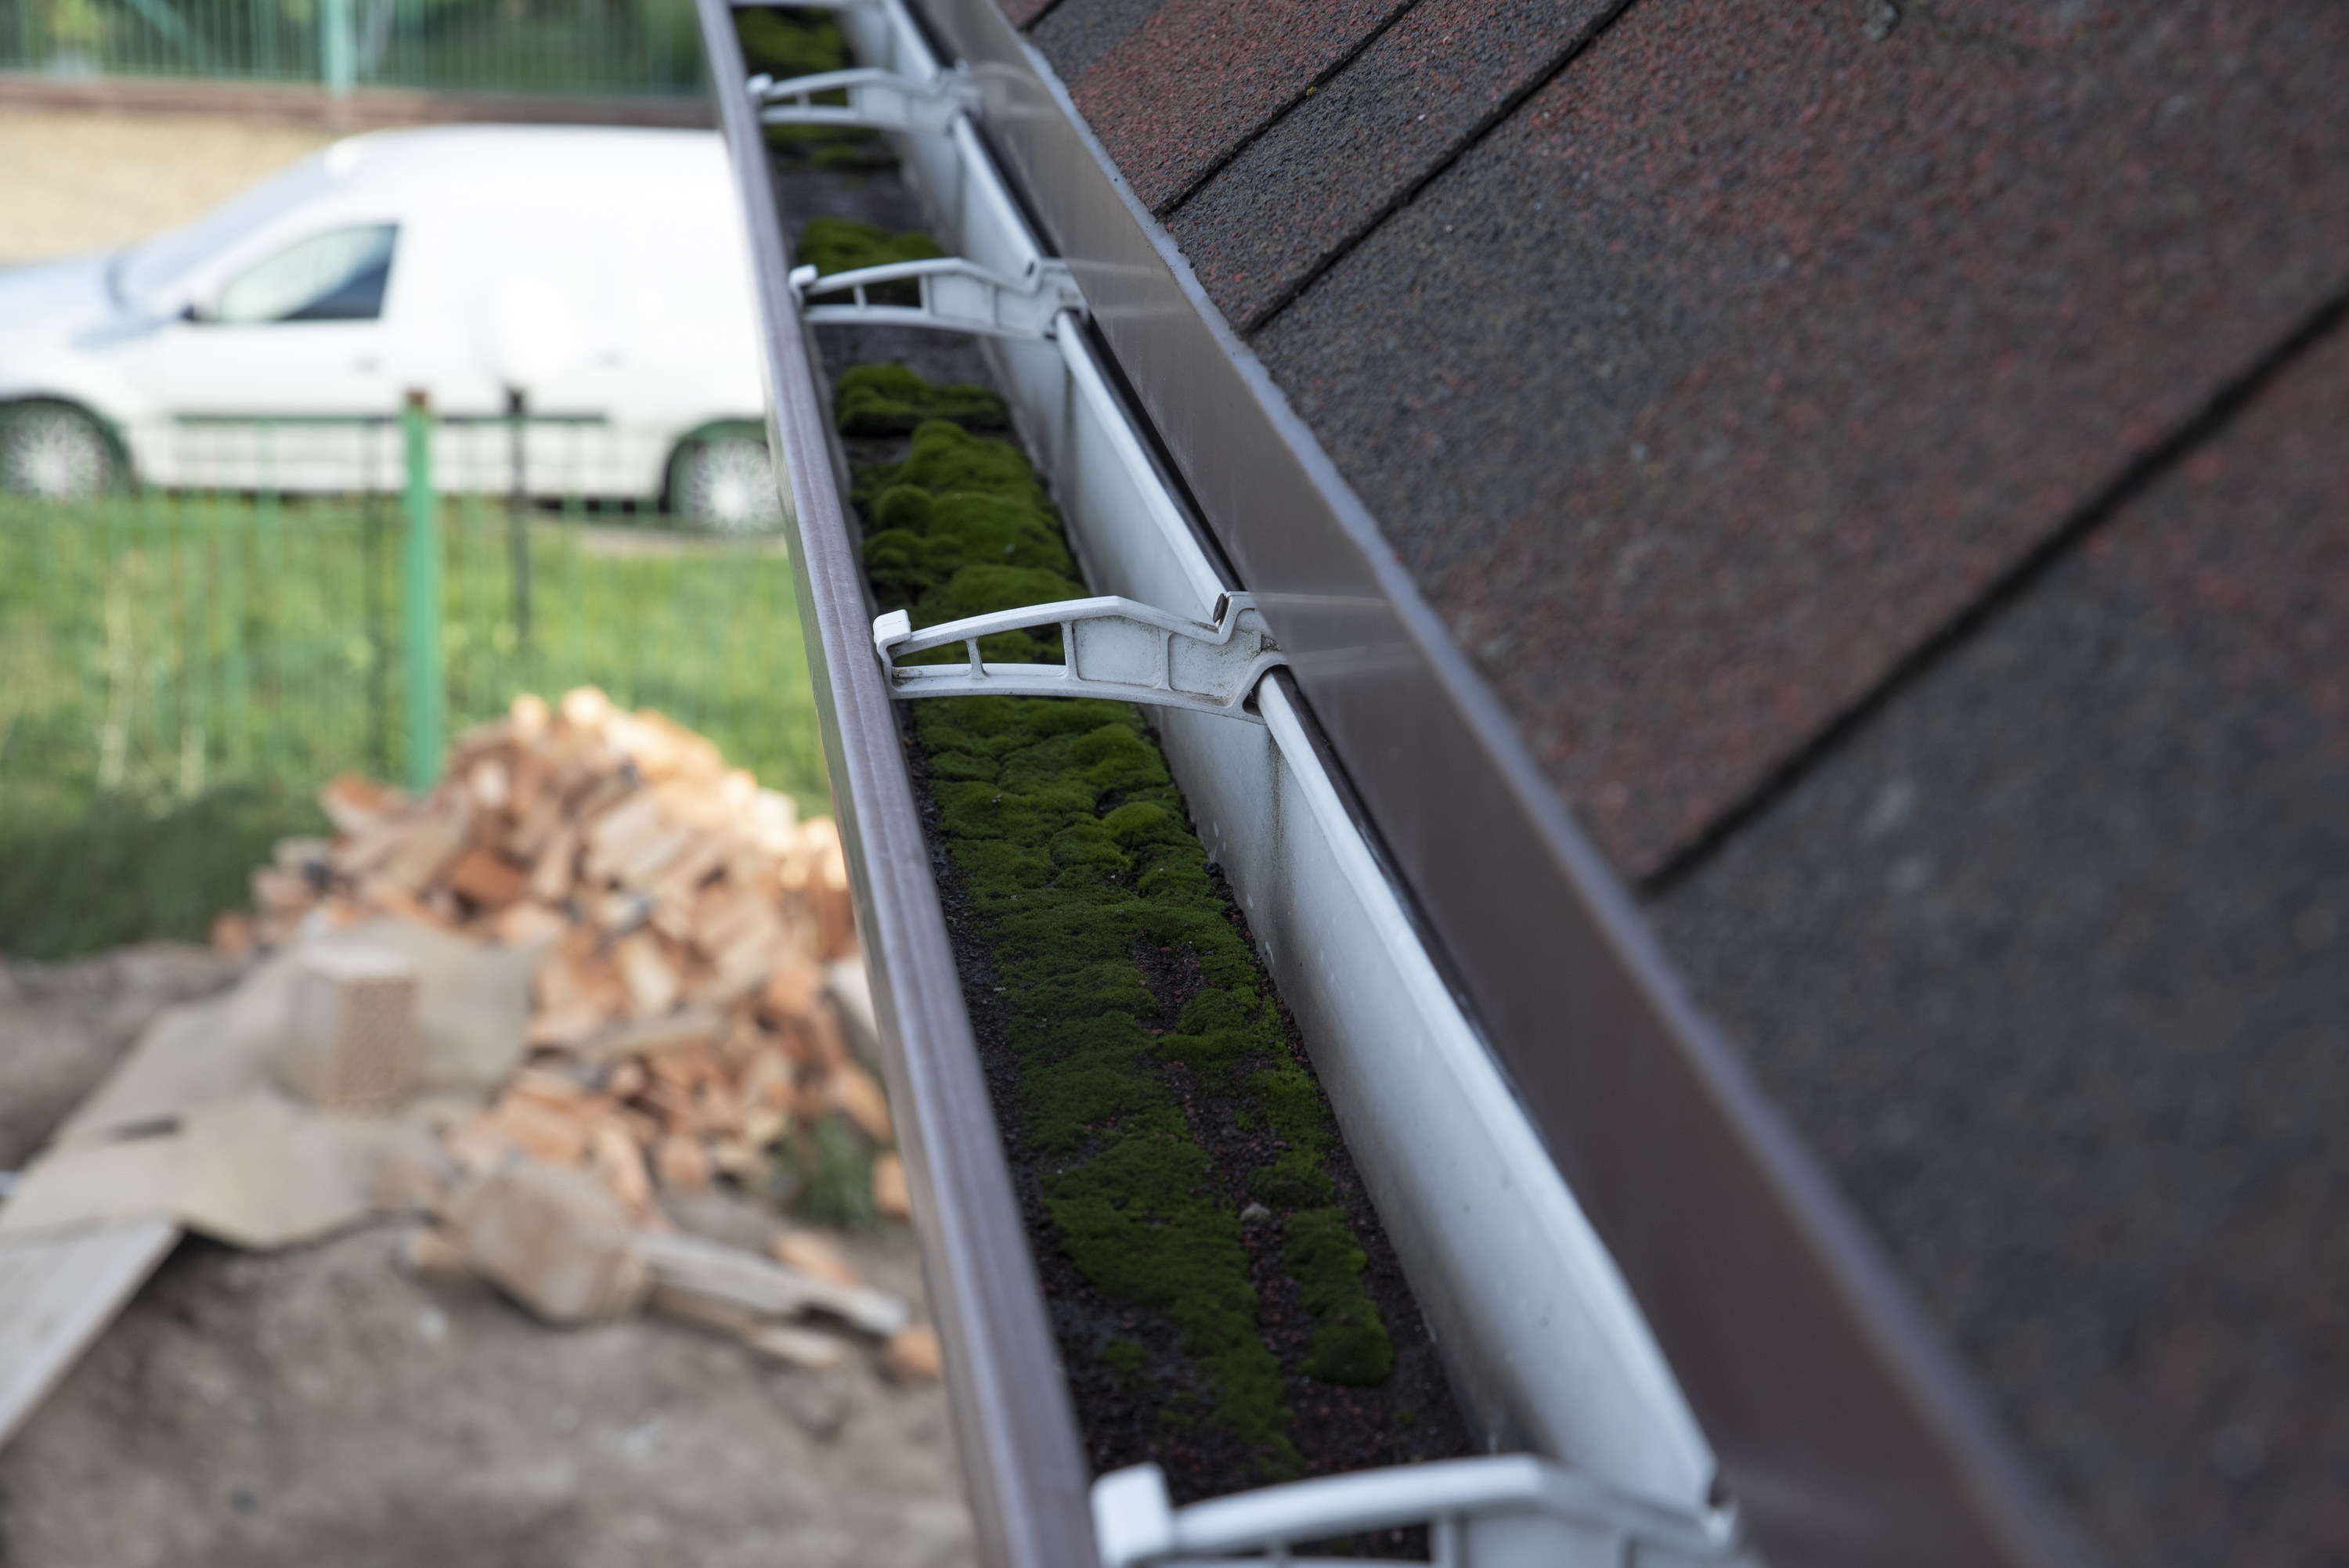 Gutter system clogged with dirt and moss